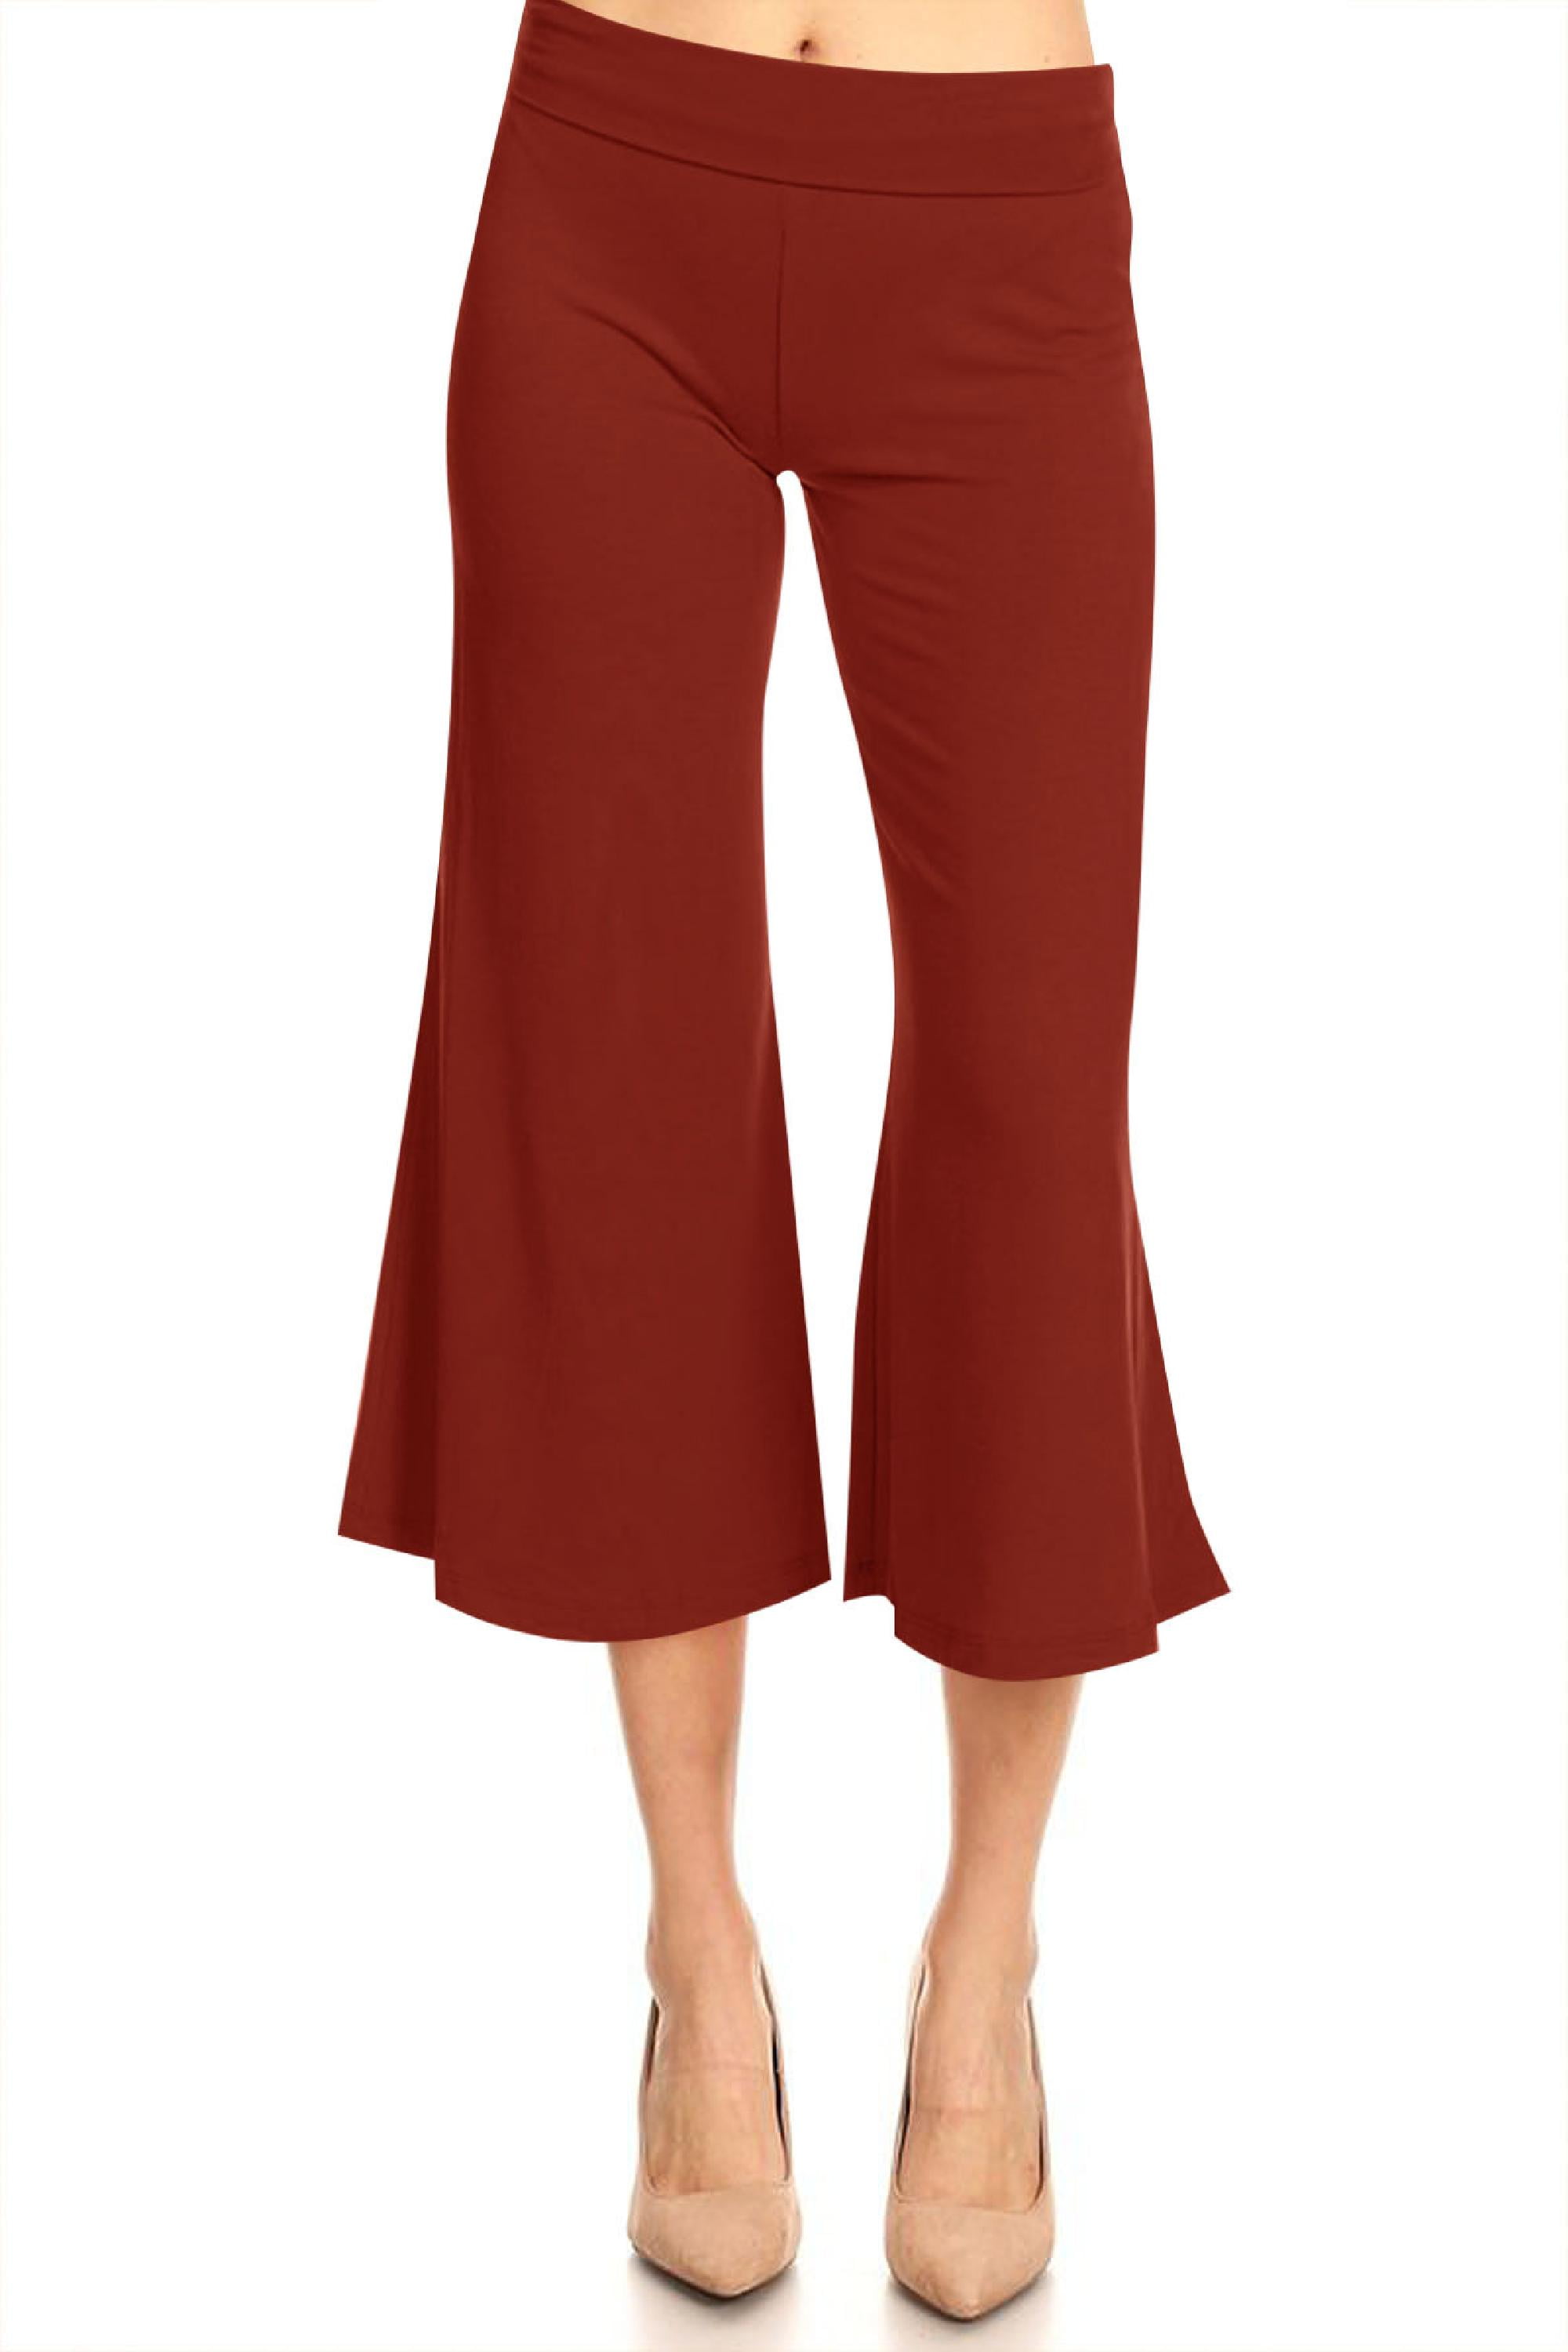 Women's Casual Relaxed Fit Lounge Wear Comfy A-Line Basic Solid Gaucho  Capri Pants - Walmart.com